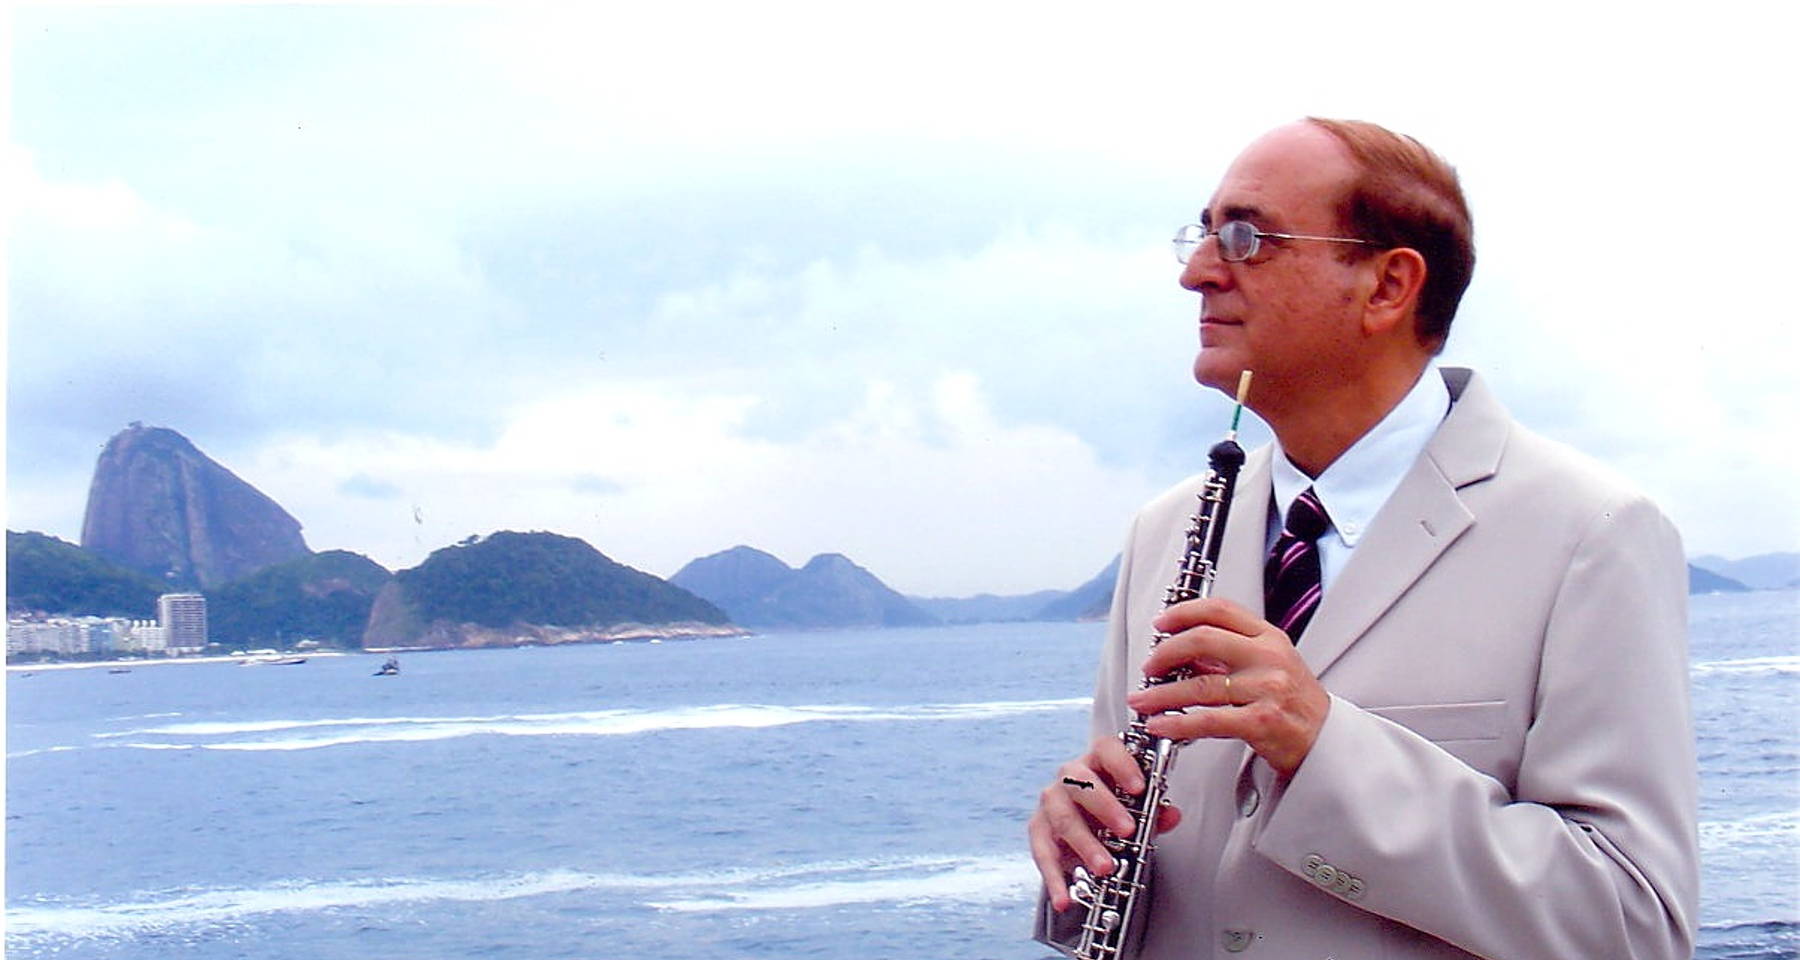 A recital of oboe and guitar music from Brazil